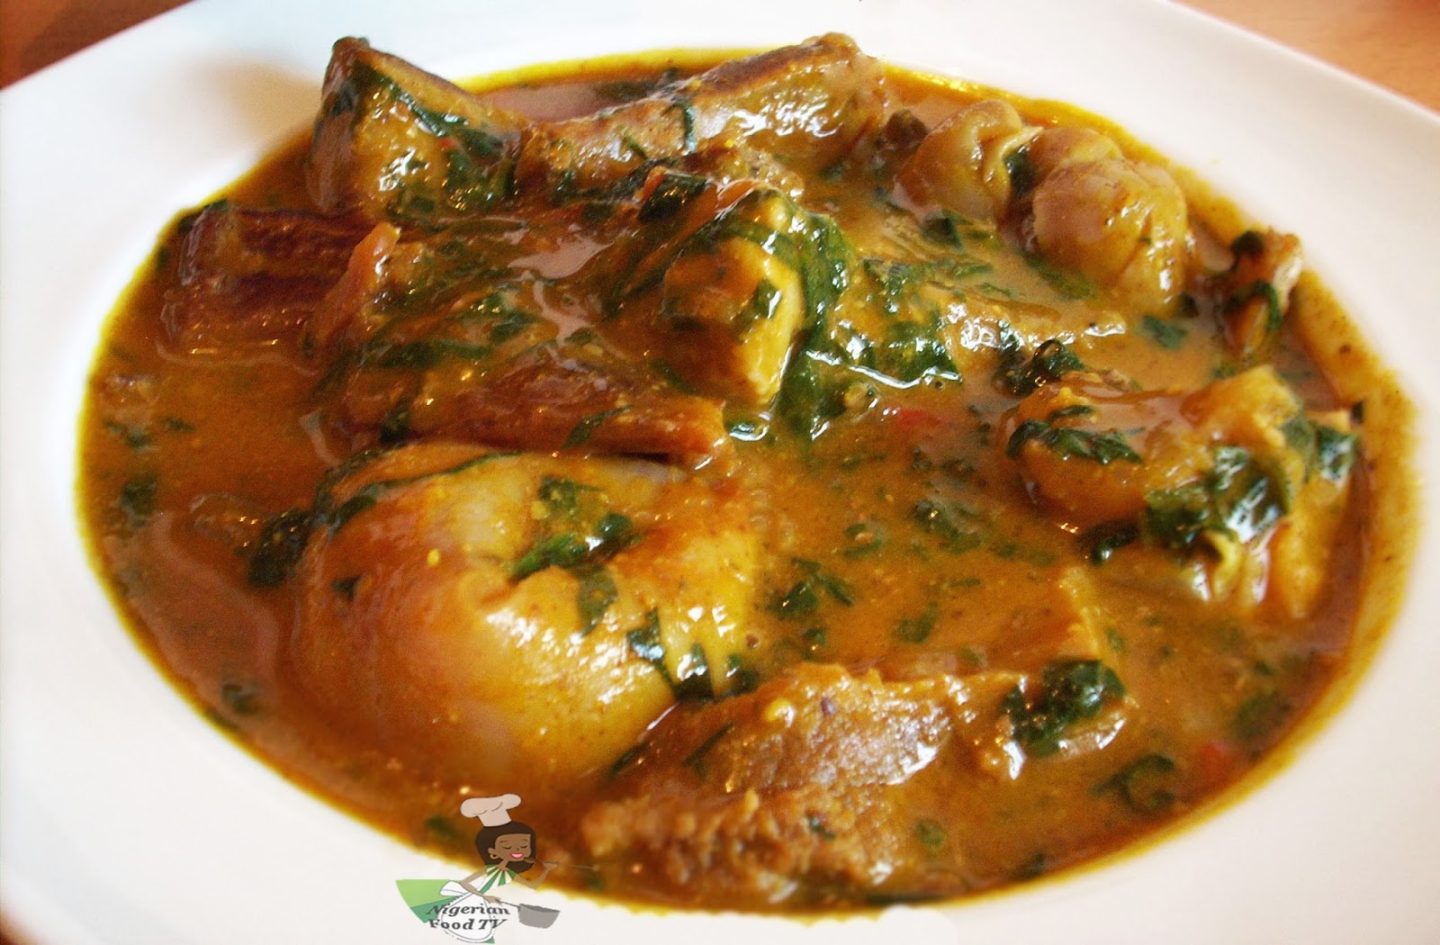  Ogbono soup with chicken, Ogbono seeds online, Ogbono soup and traditional dishes, Ogbono soup for a healthy diet, Ogbono seeds for sale, Creamy Ogbono soup, Ogbono soup and weight management, Ogbono soup with fufu, Ogbono seeds and cholesterol, Ogbono soup and body weight, Ogbono seeds in Nigerian cuisine, Ogbono soup restaurant, Ogbono soup and heart health, 